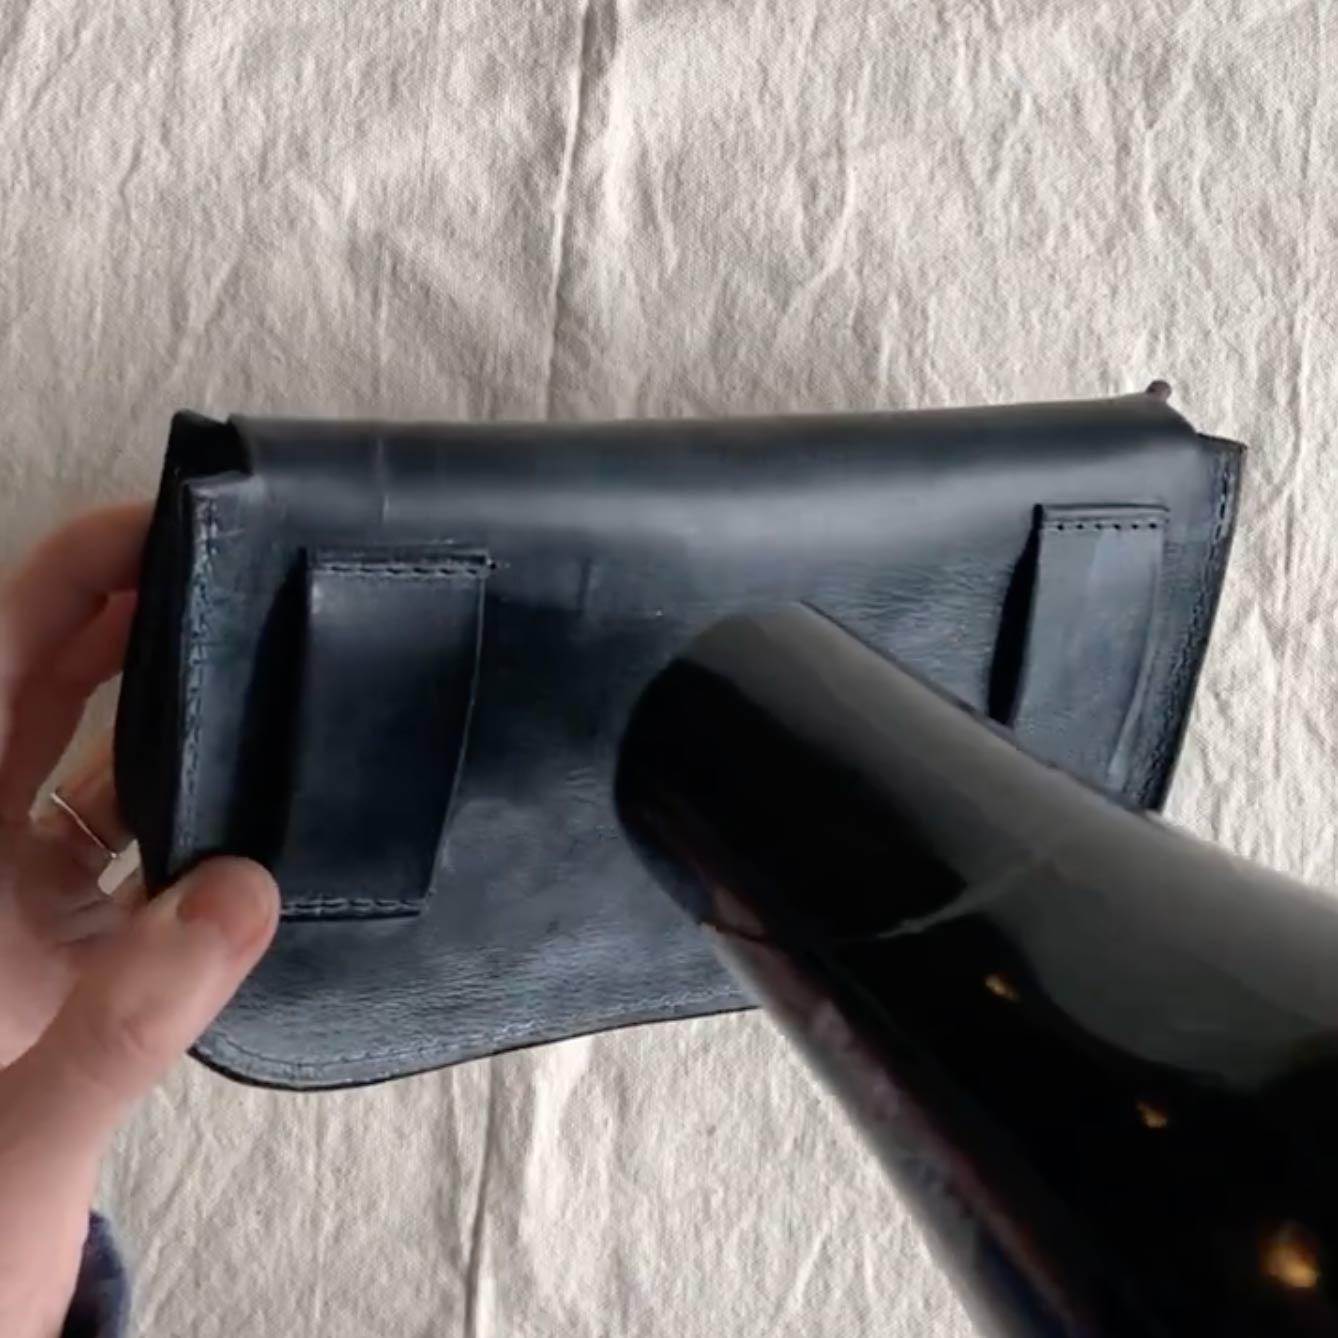 blowing hot air with a hairdryer onto a bag to melt the solidified wax